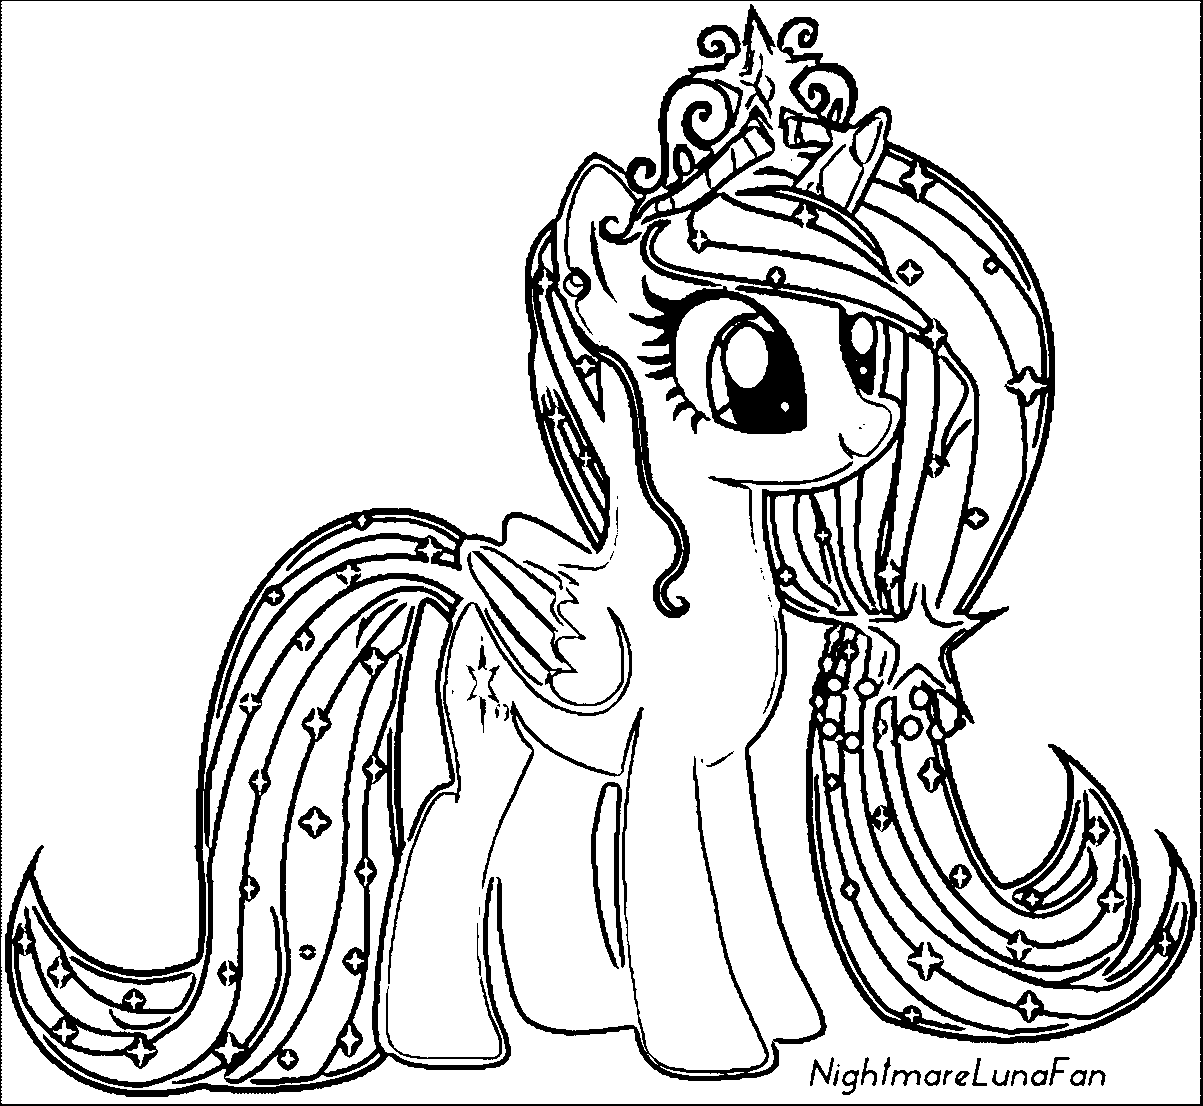 My Little Pony Coloring Pages Twilight Sparkle And Friends - Coloring Home